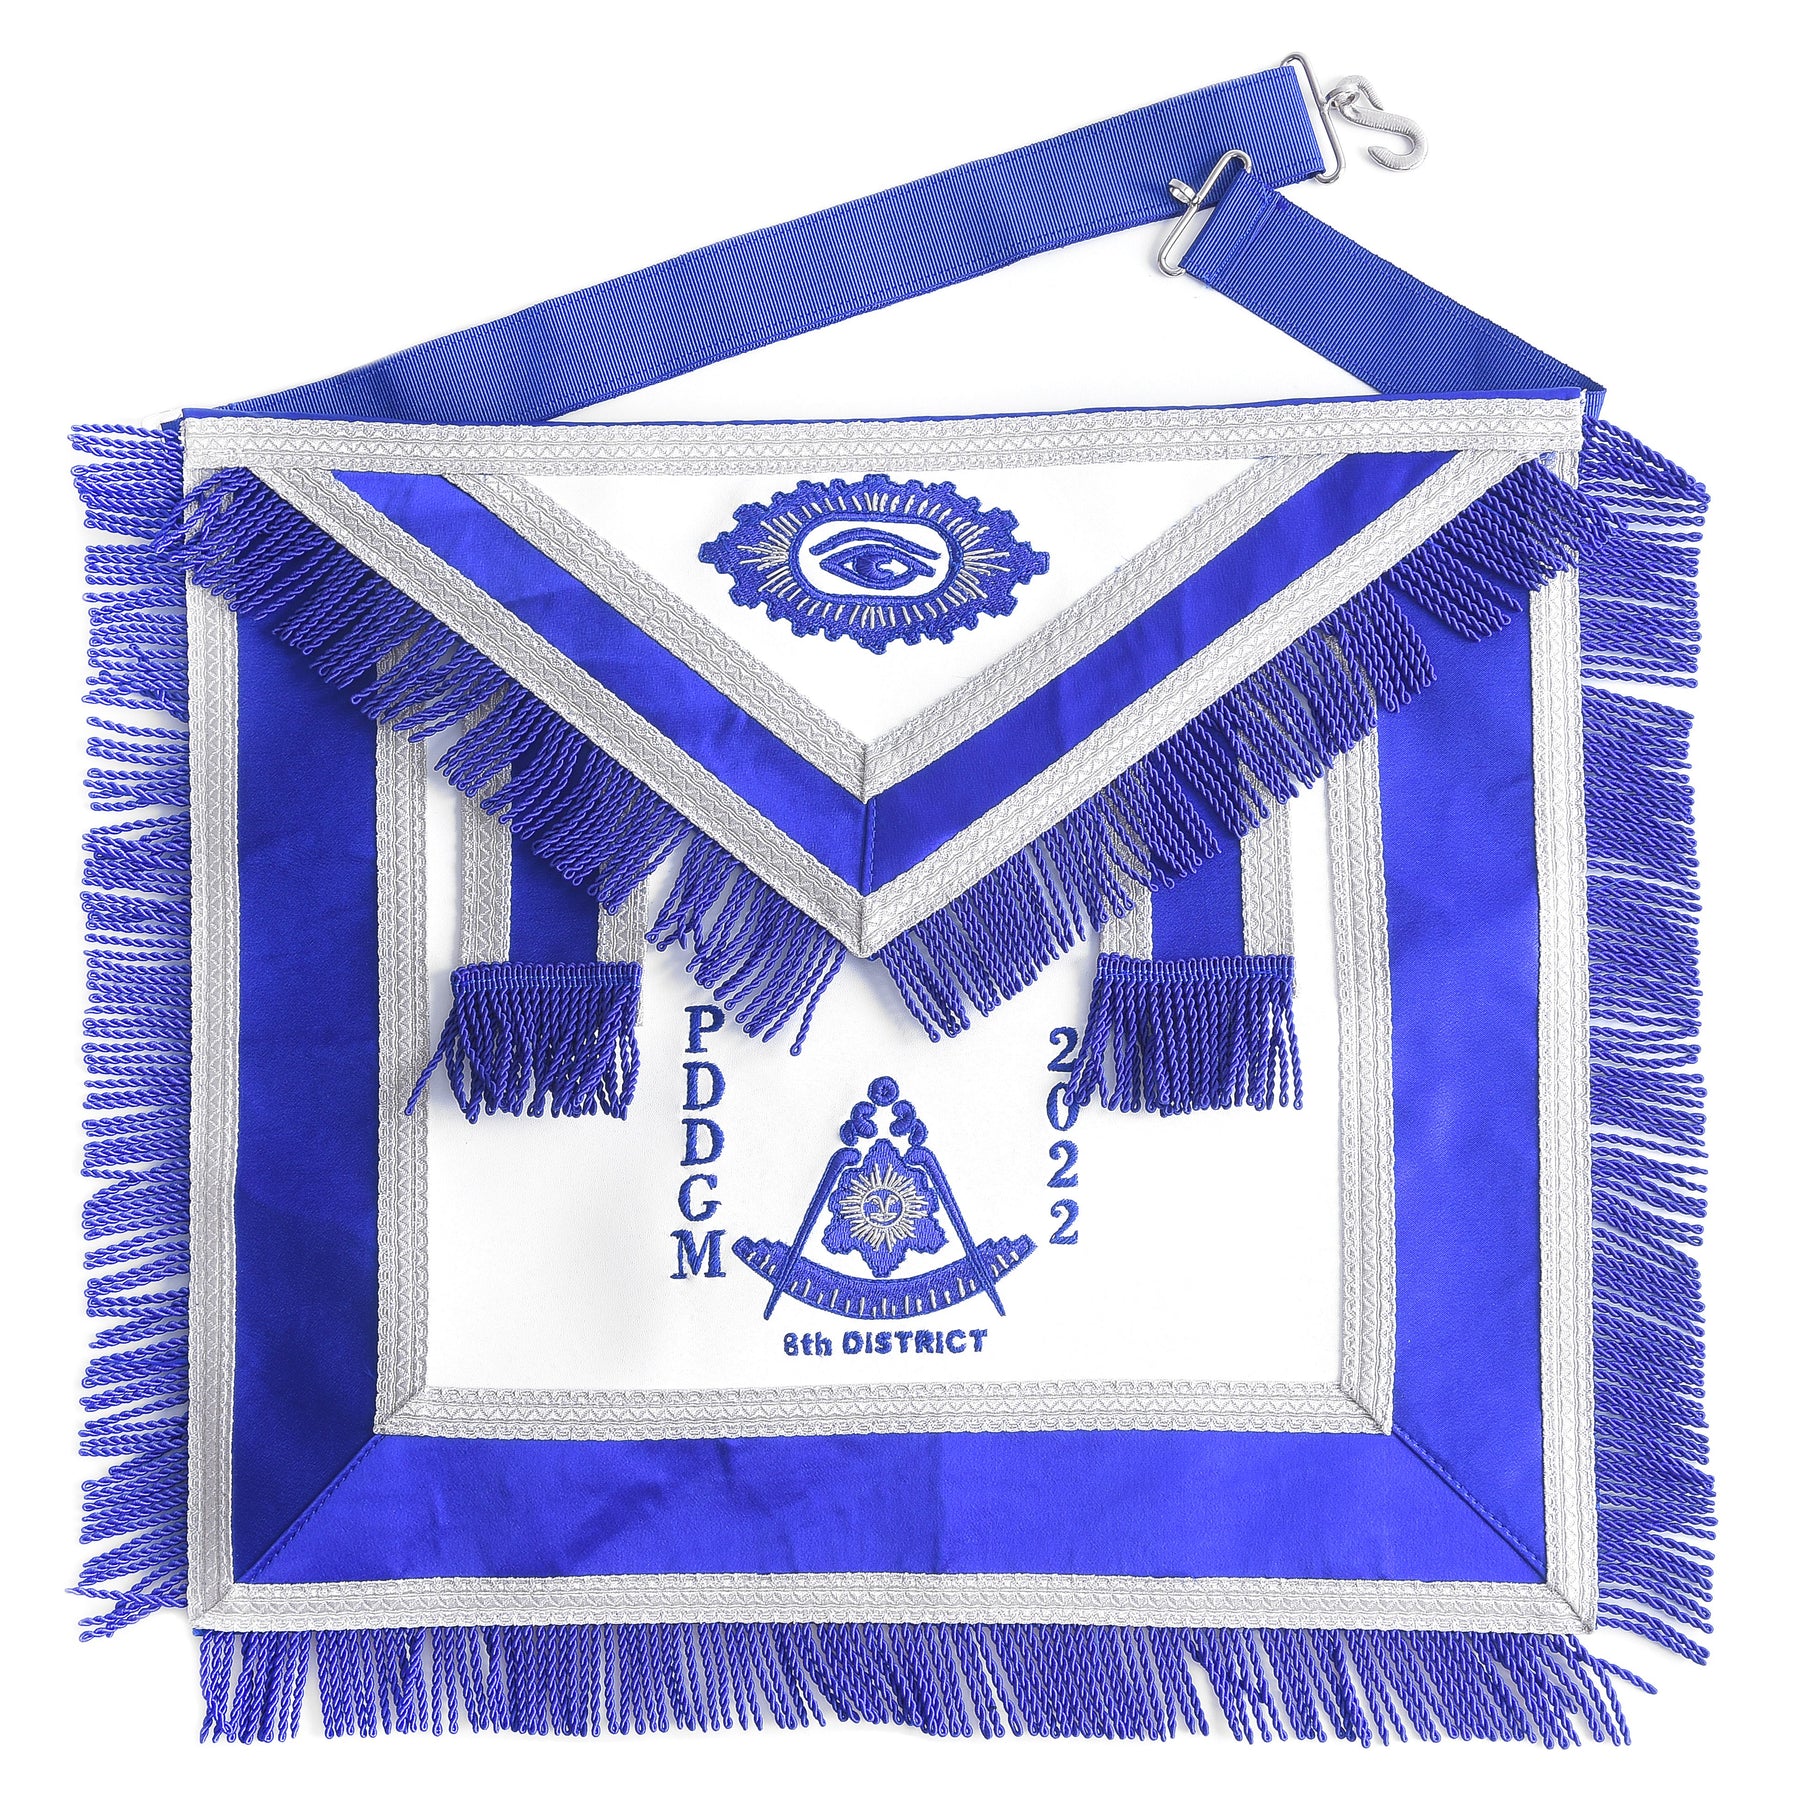 Past District Deputy Grand Master Blue Lodge Apron - Hand Embroidery With Blue Borders - Bricks Masons